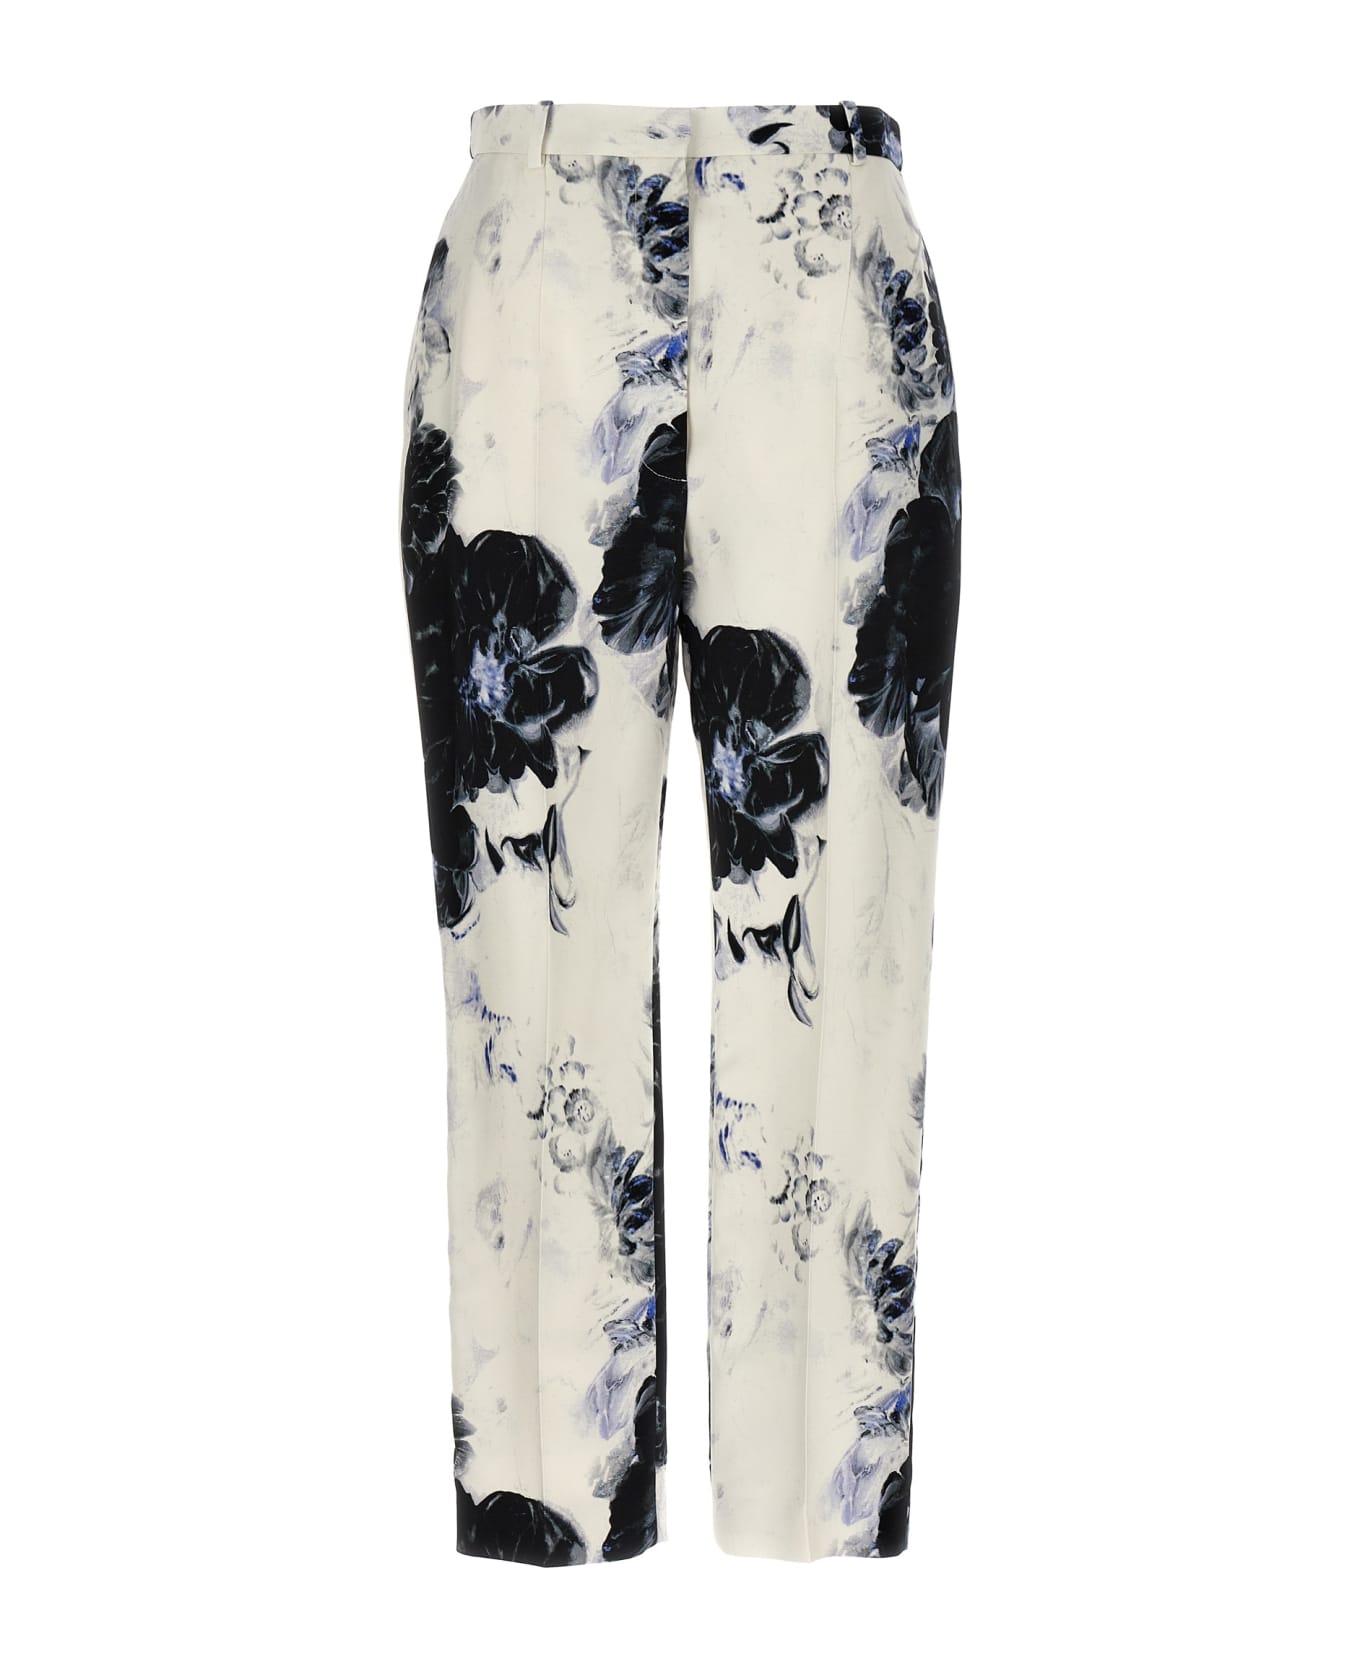 Alexander McQueen Floral Print Viscose Trouser - White ボトムス